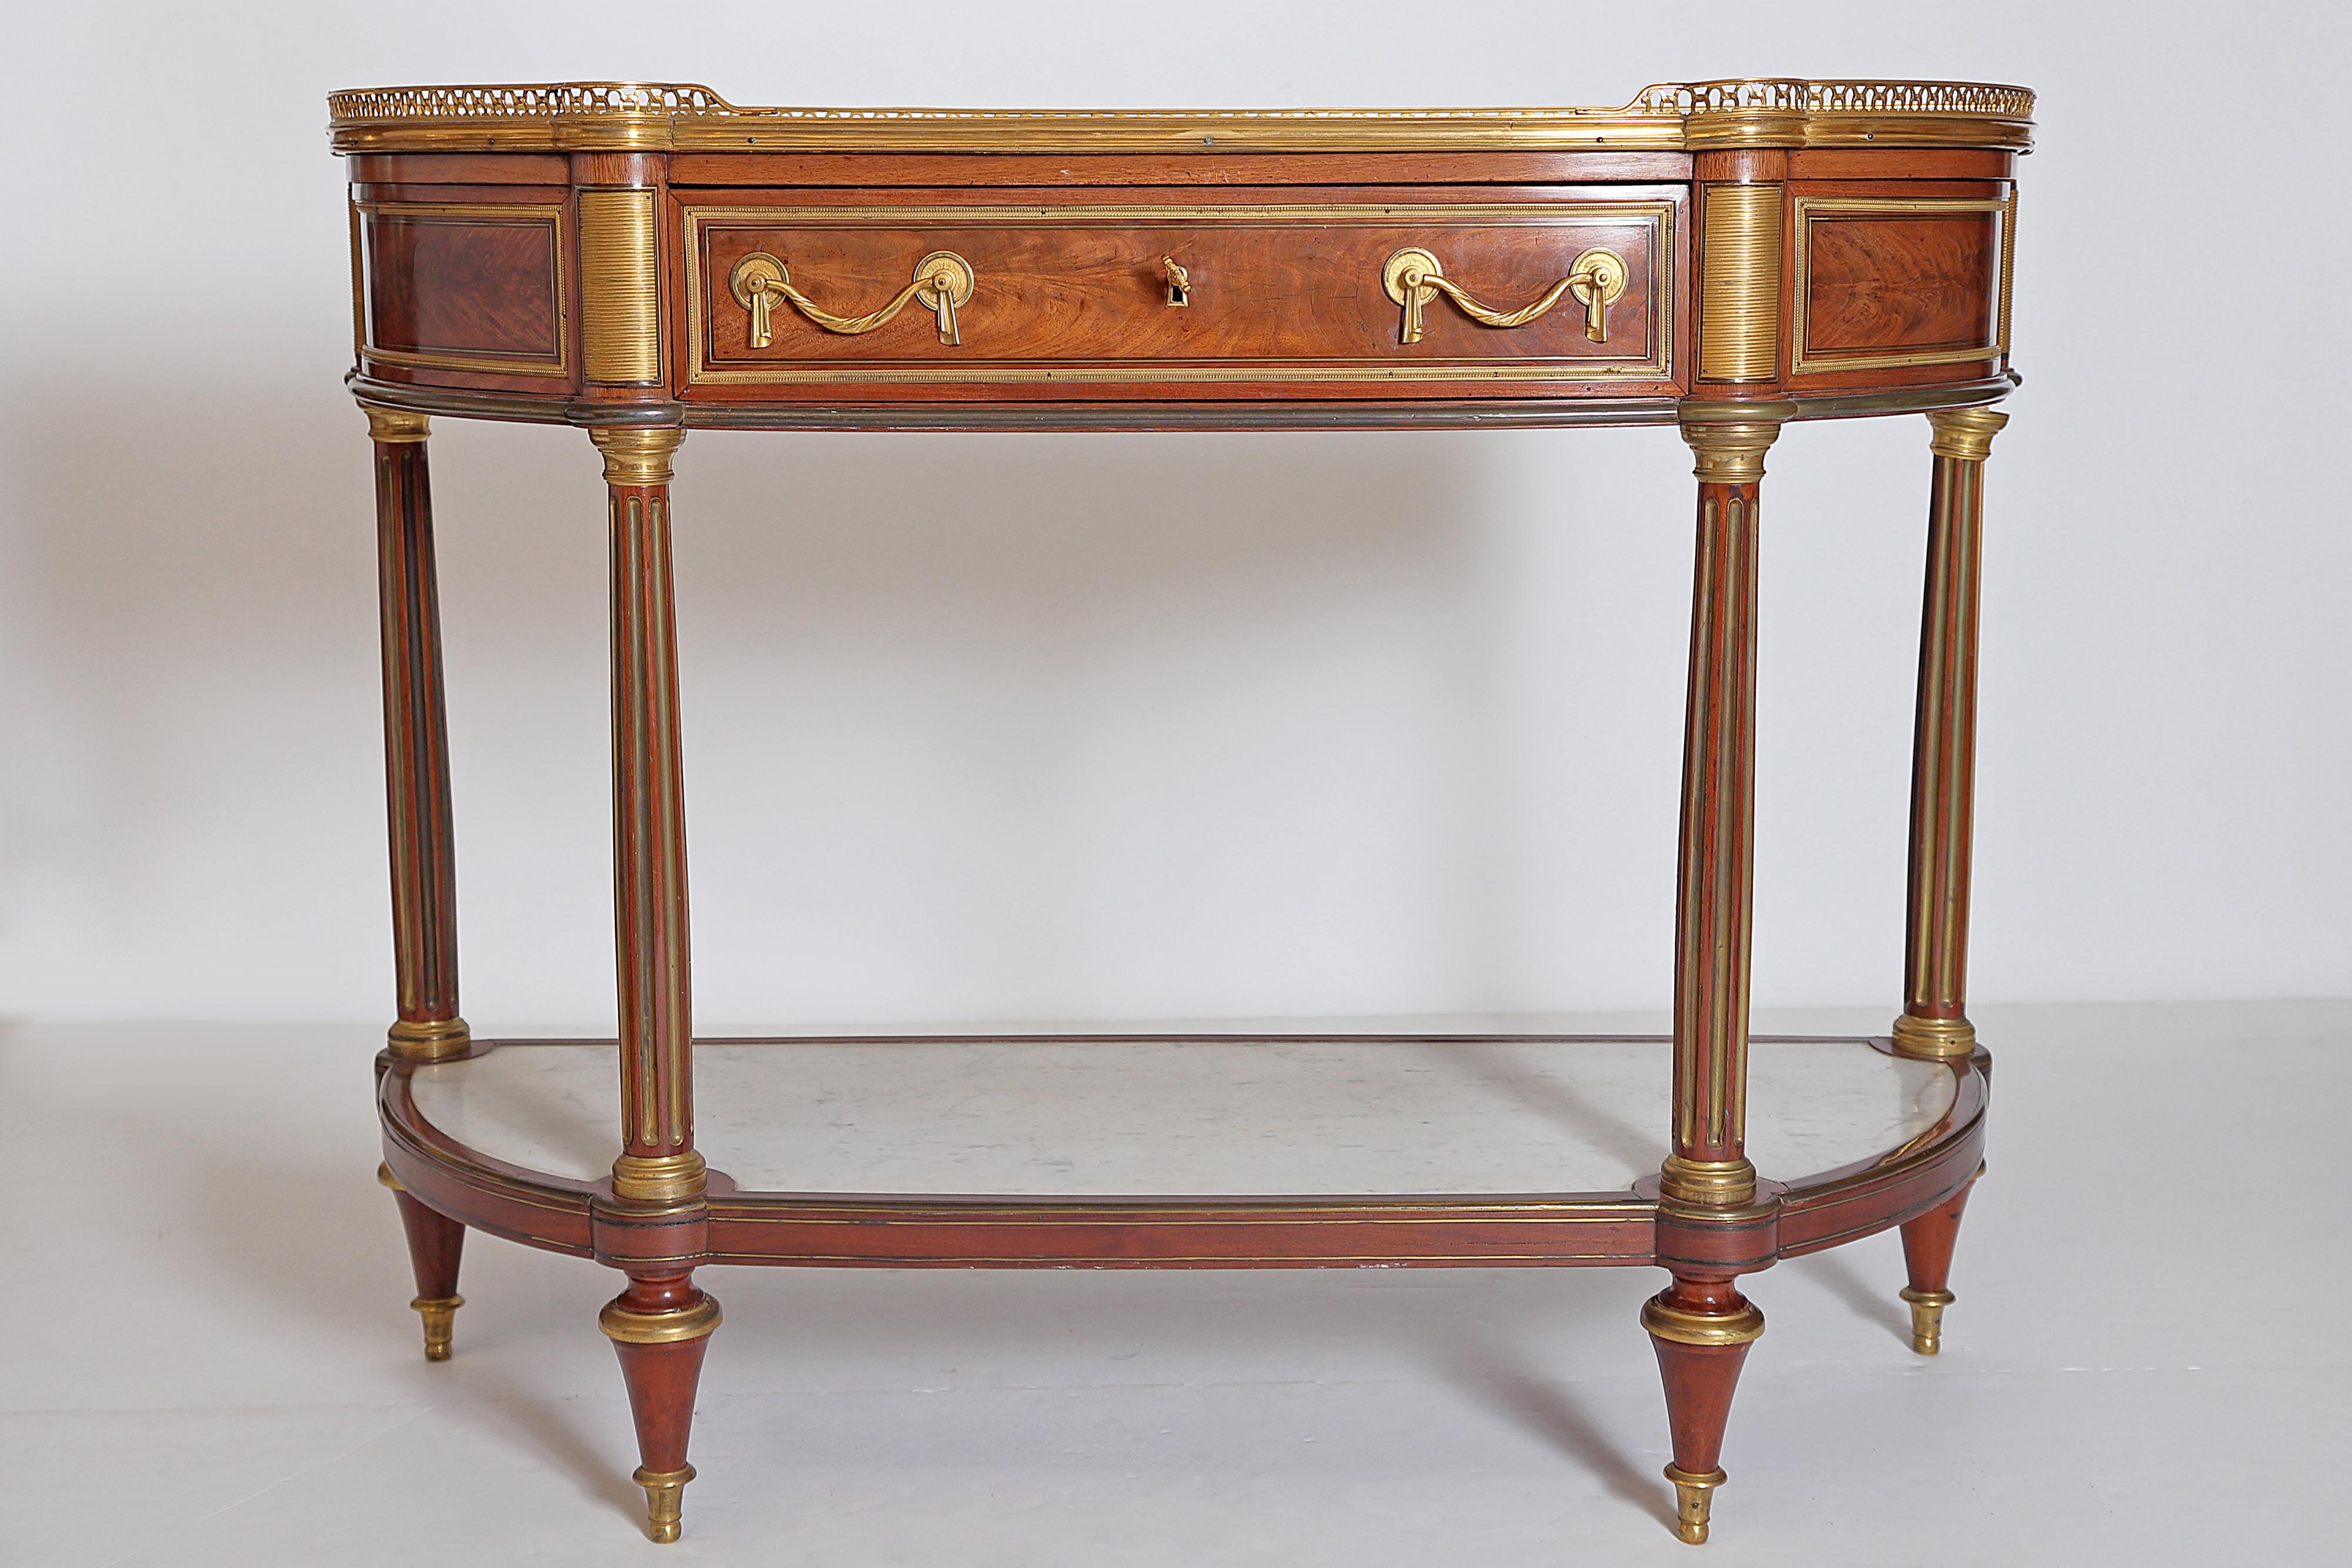 French Louis XVI Mahogany, Ormolu and Marble Desserte, Signed I. PAFRAT, circa 1775 For Sale